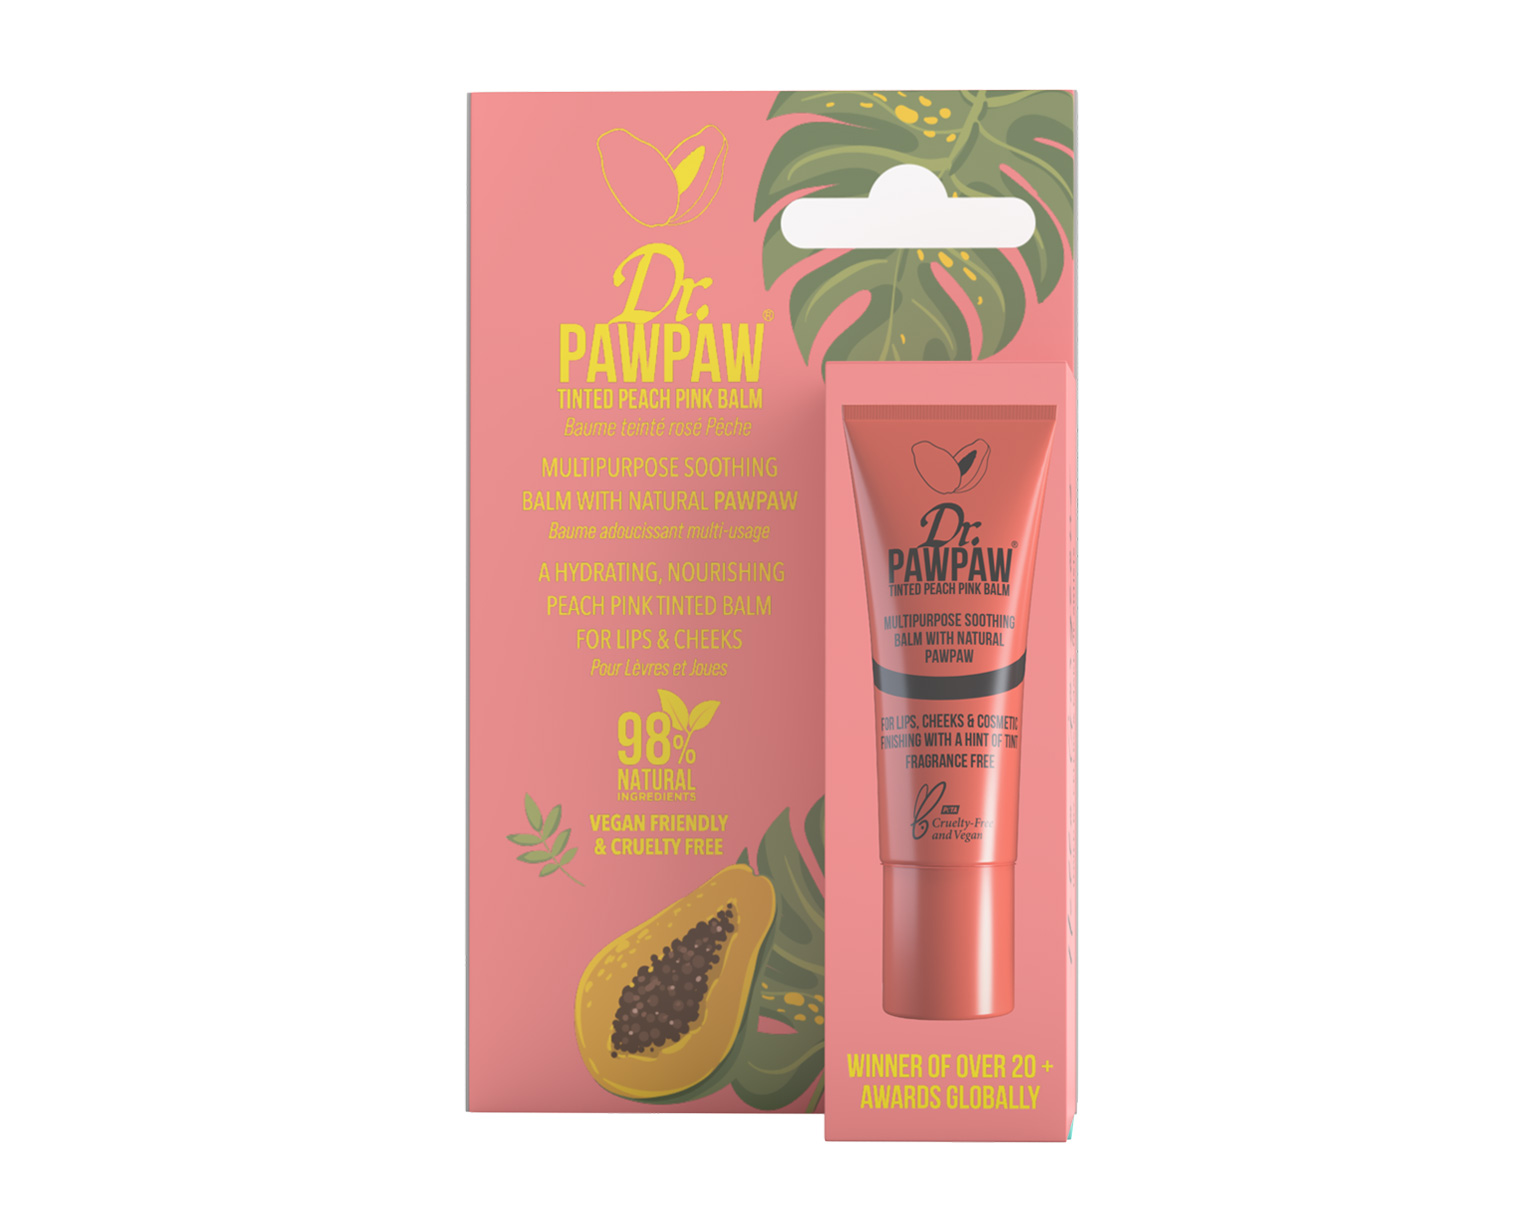 Dr.PAWPAW now available at TESCO